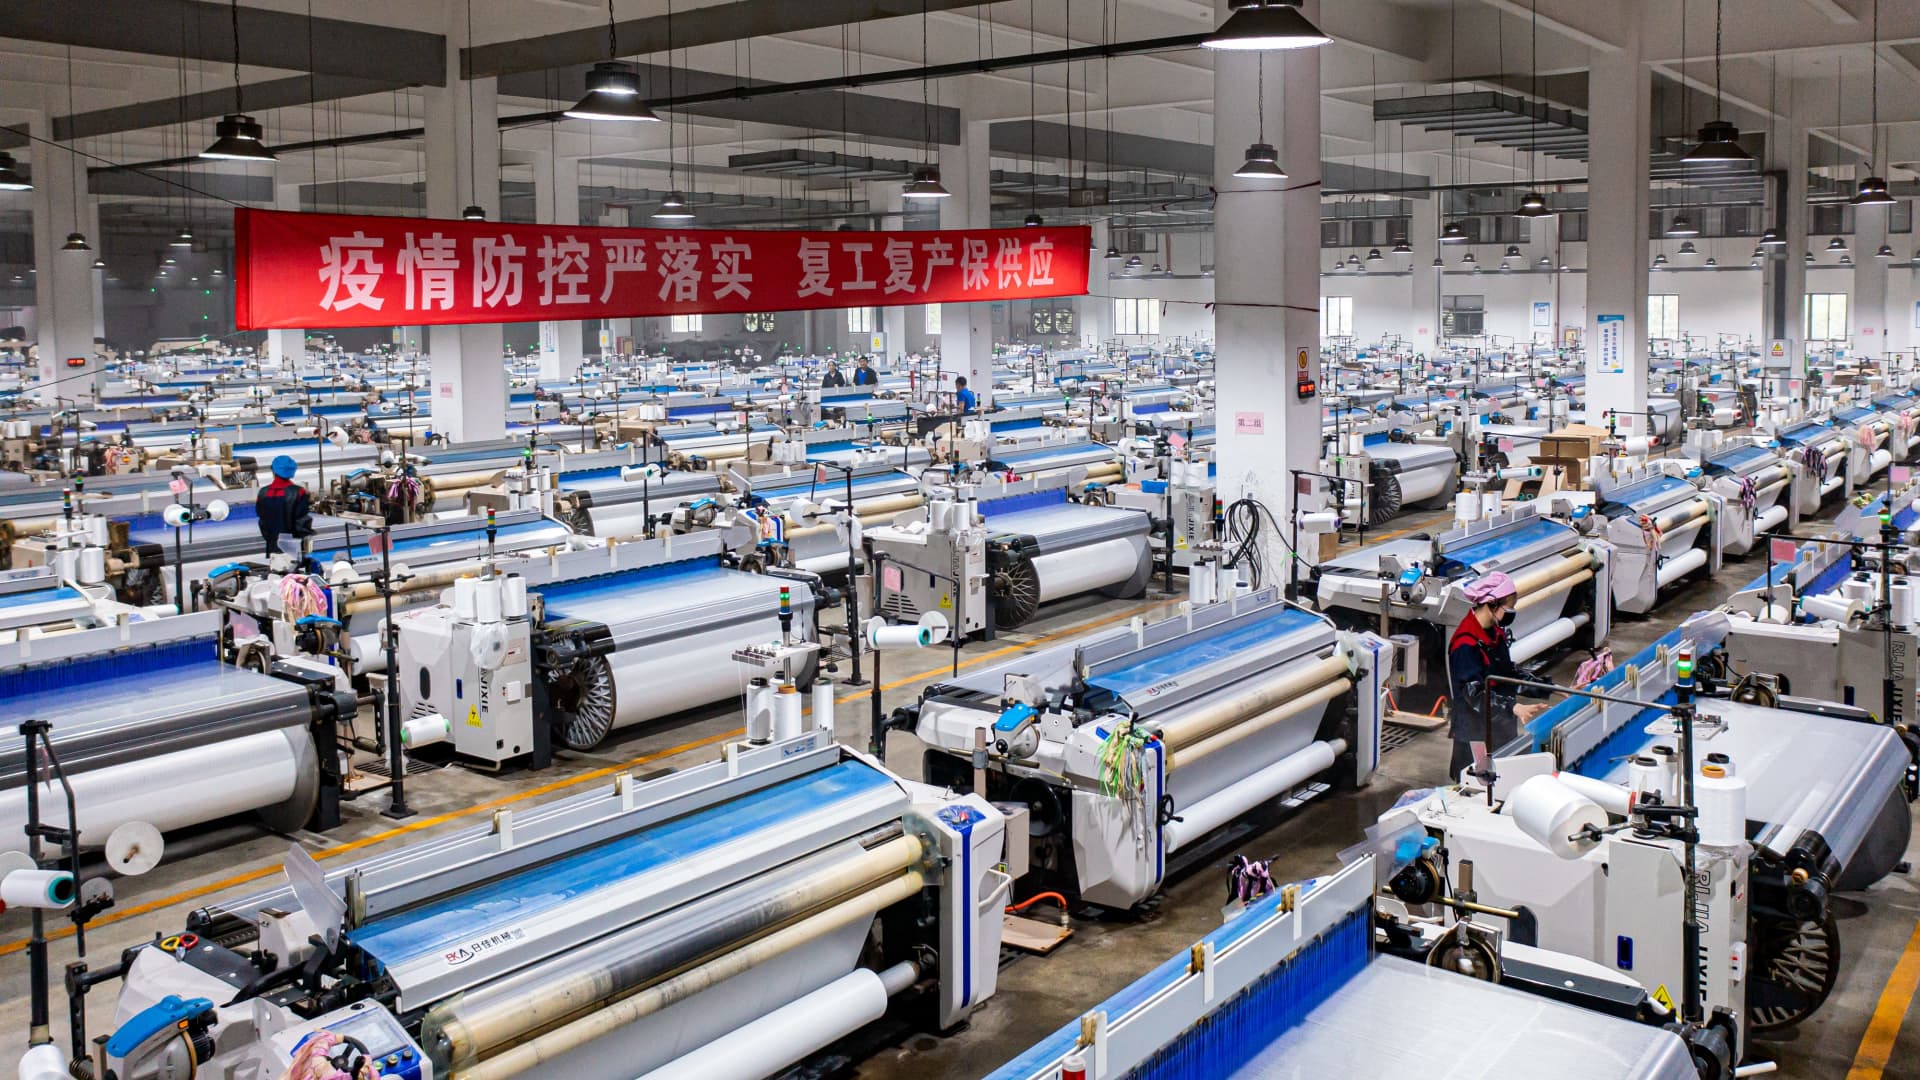 The latest Covid lockdowns in China have slowed the ability of trucks to transport goods throughout China, while keeping many factories in the Shanghai region at limited or no production for weeks. Pictured here is a textile company's workshop in the nearby Jiangsu province.